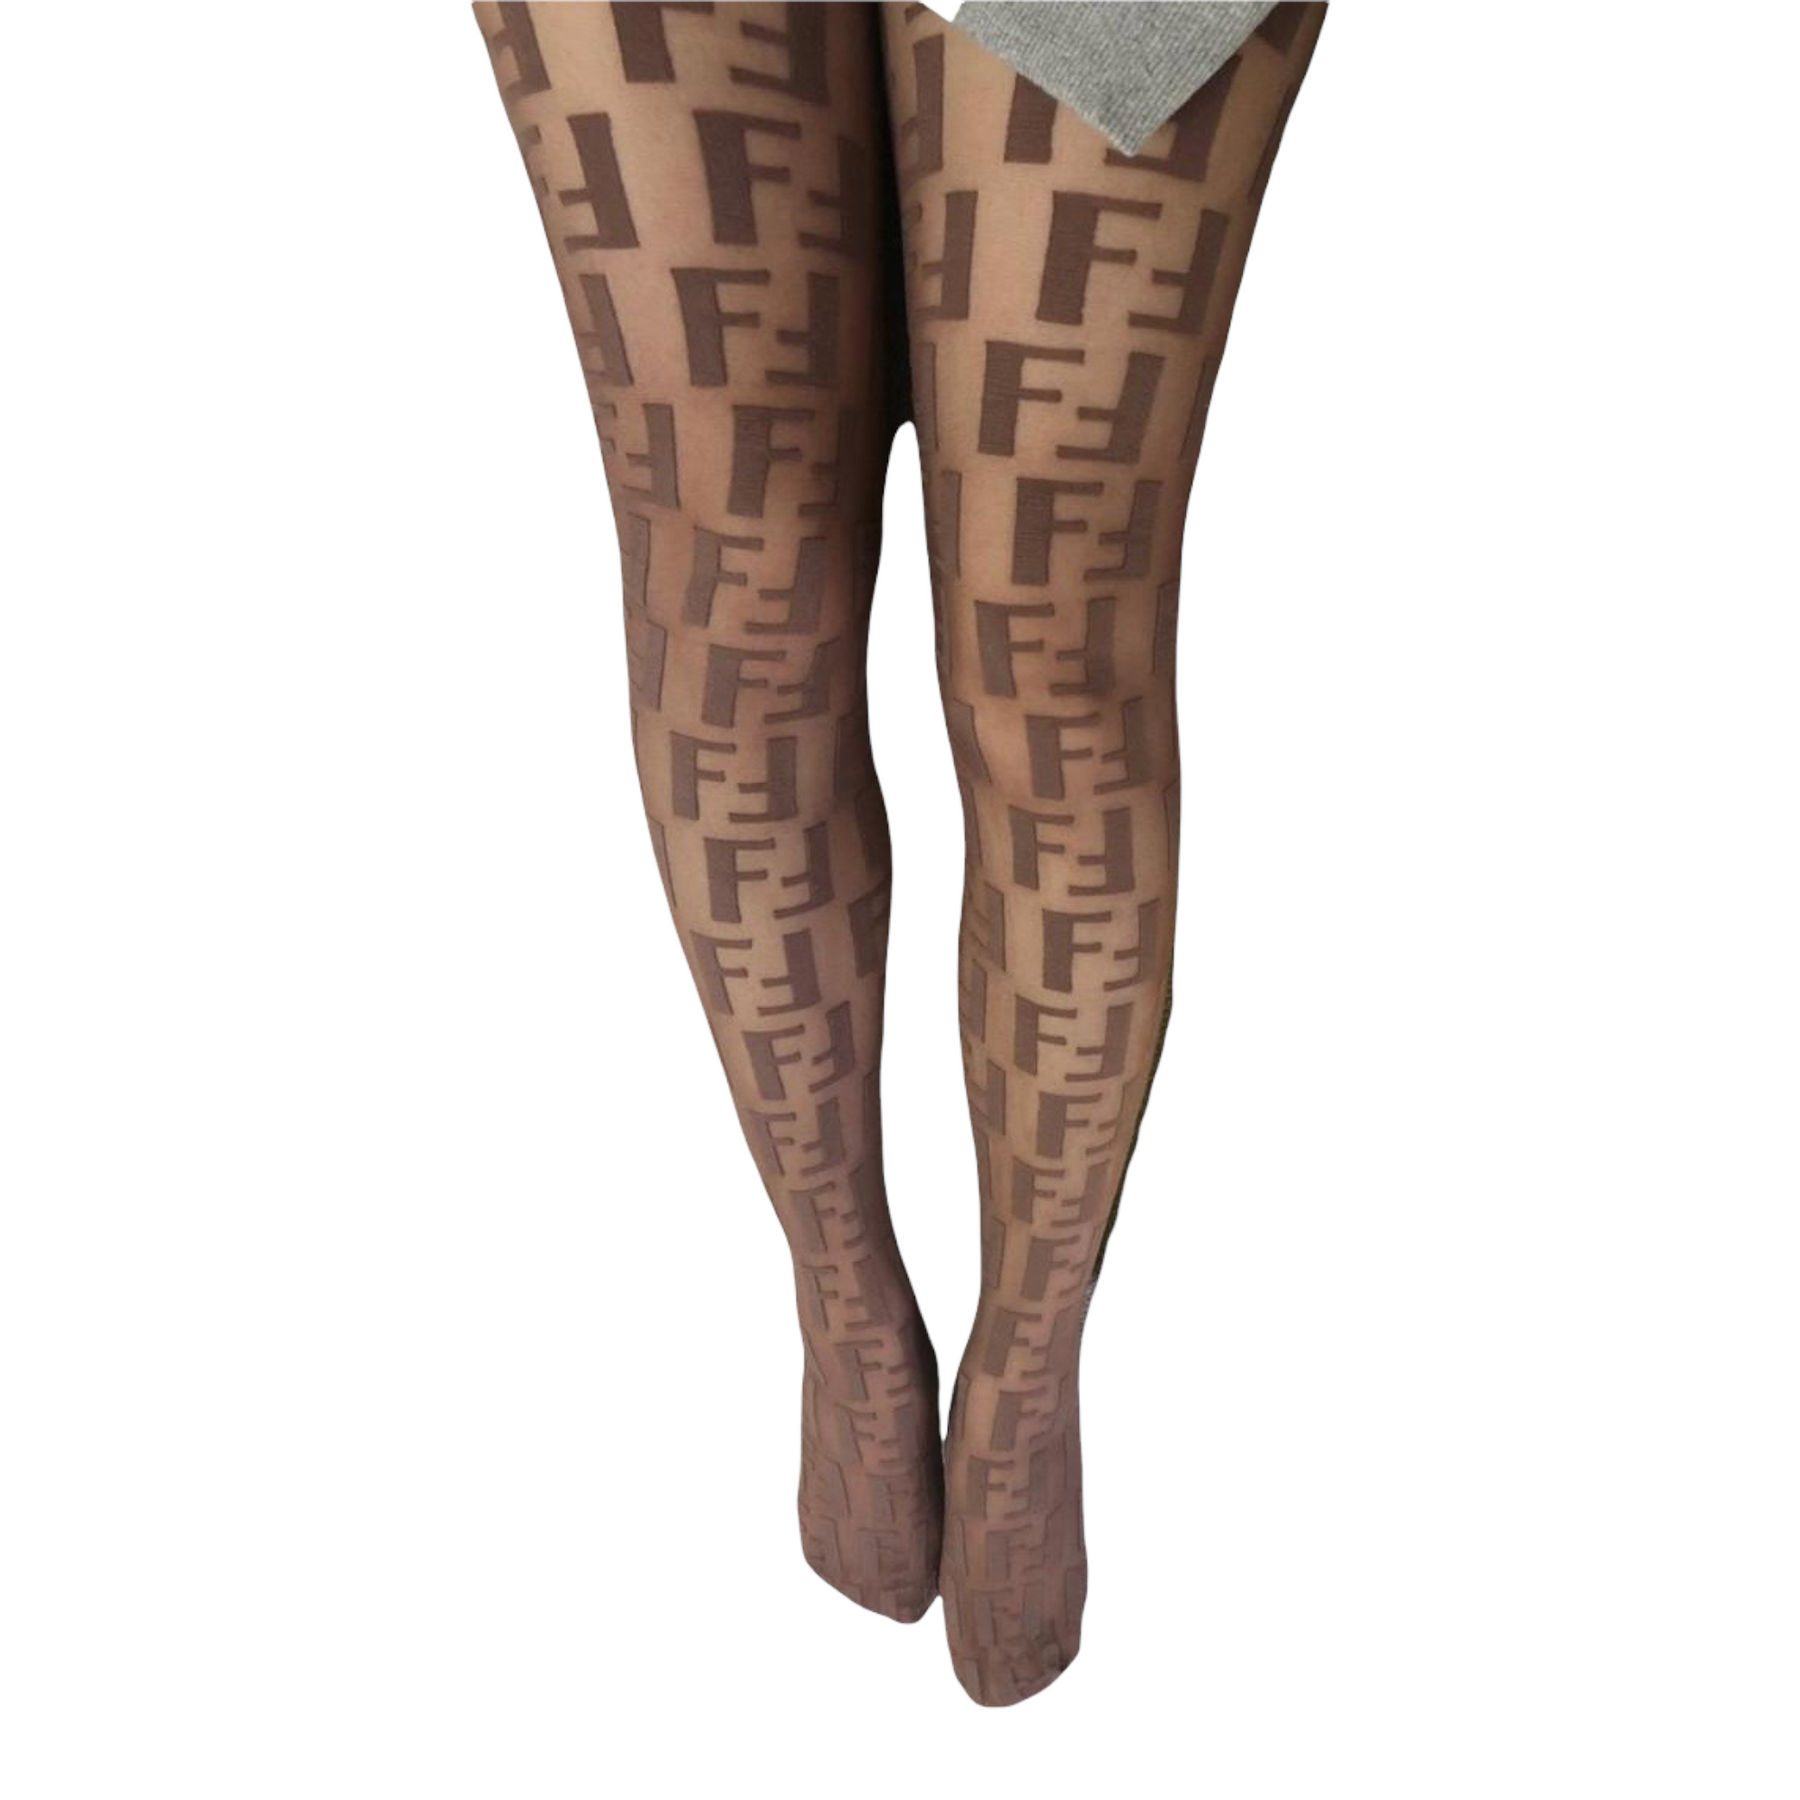 New Fendi Tights Stockings for Sale in Bakersfield, CA - OfferUp